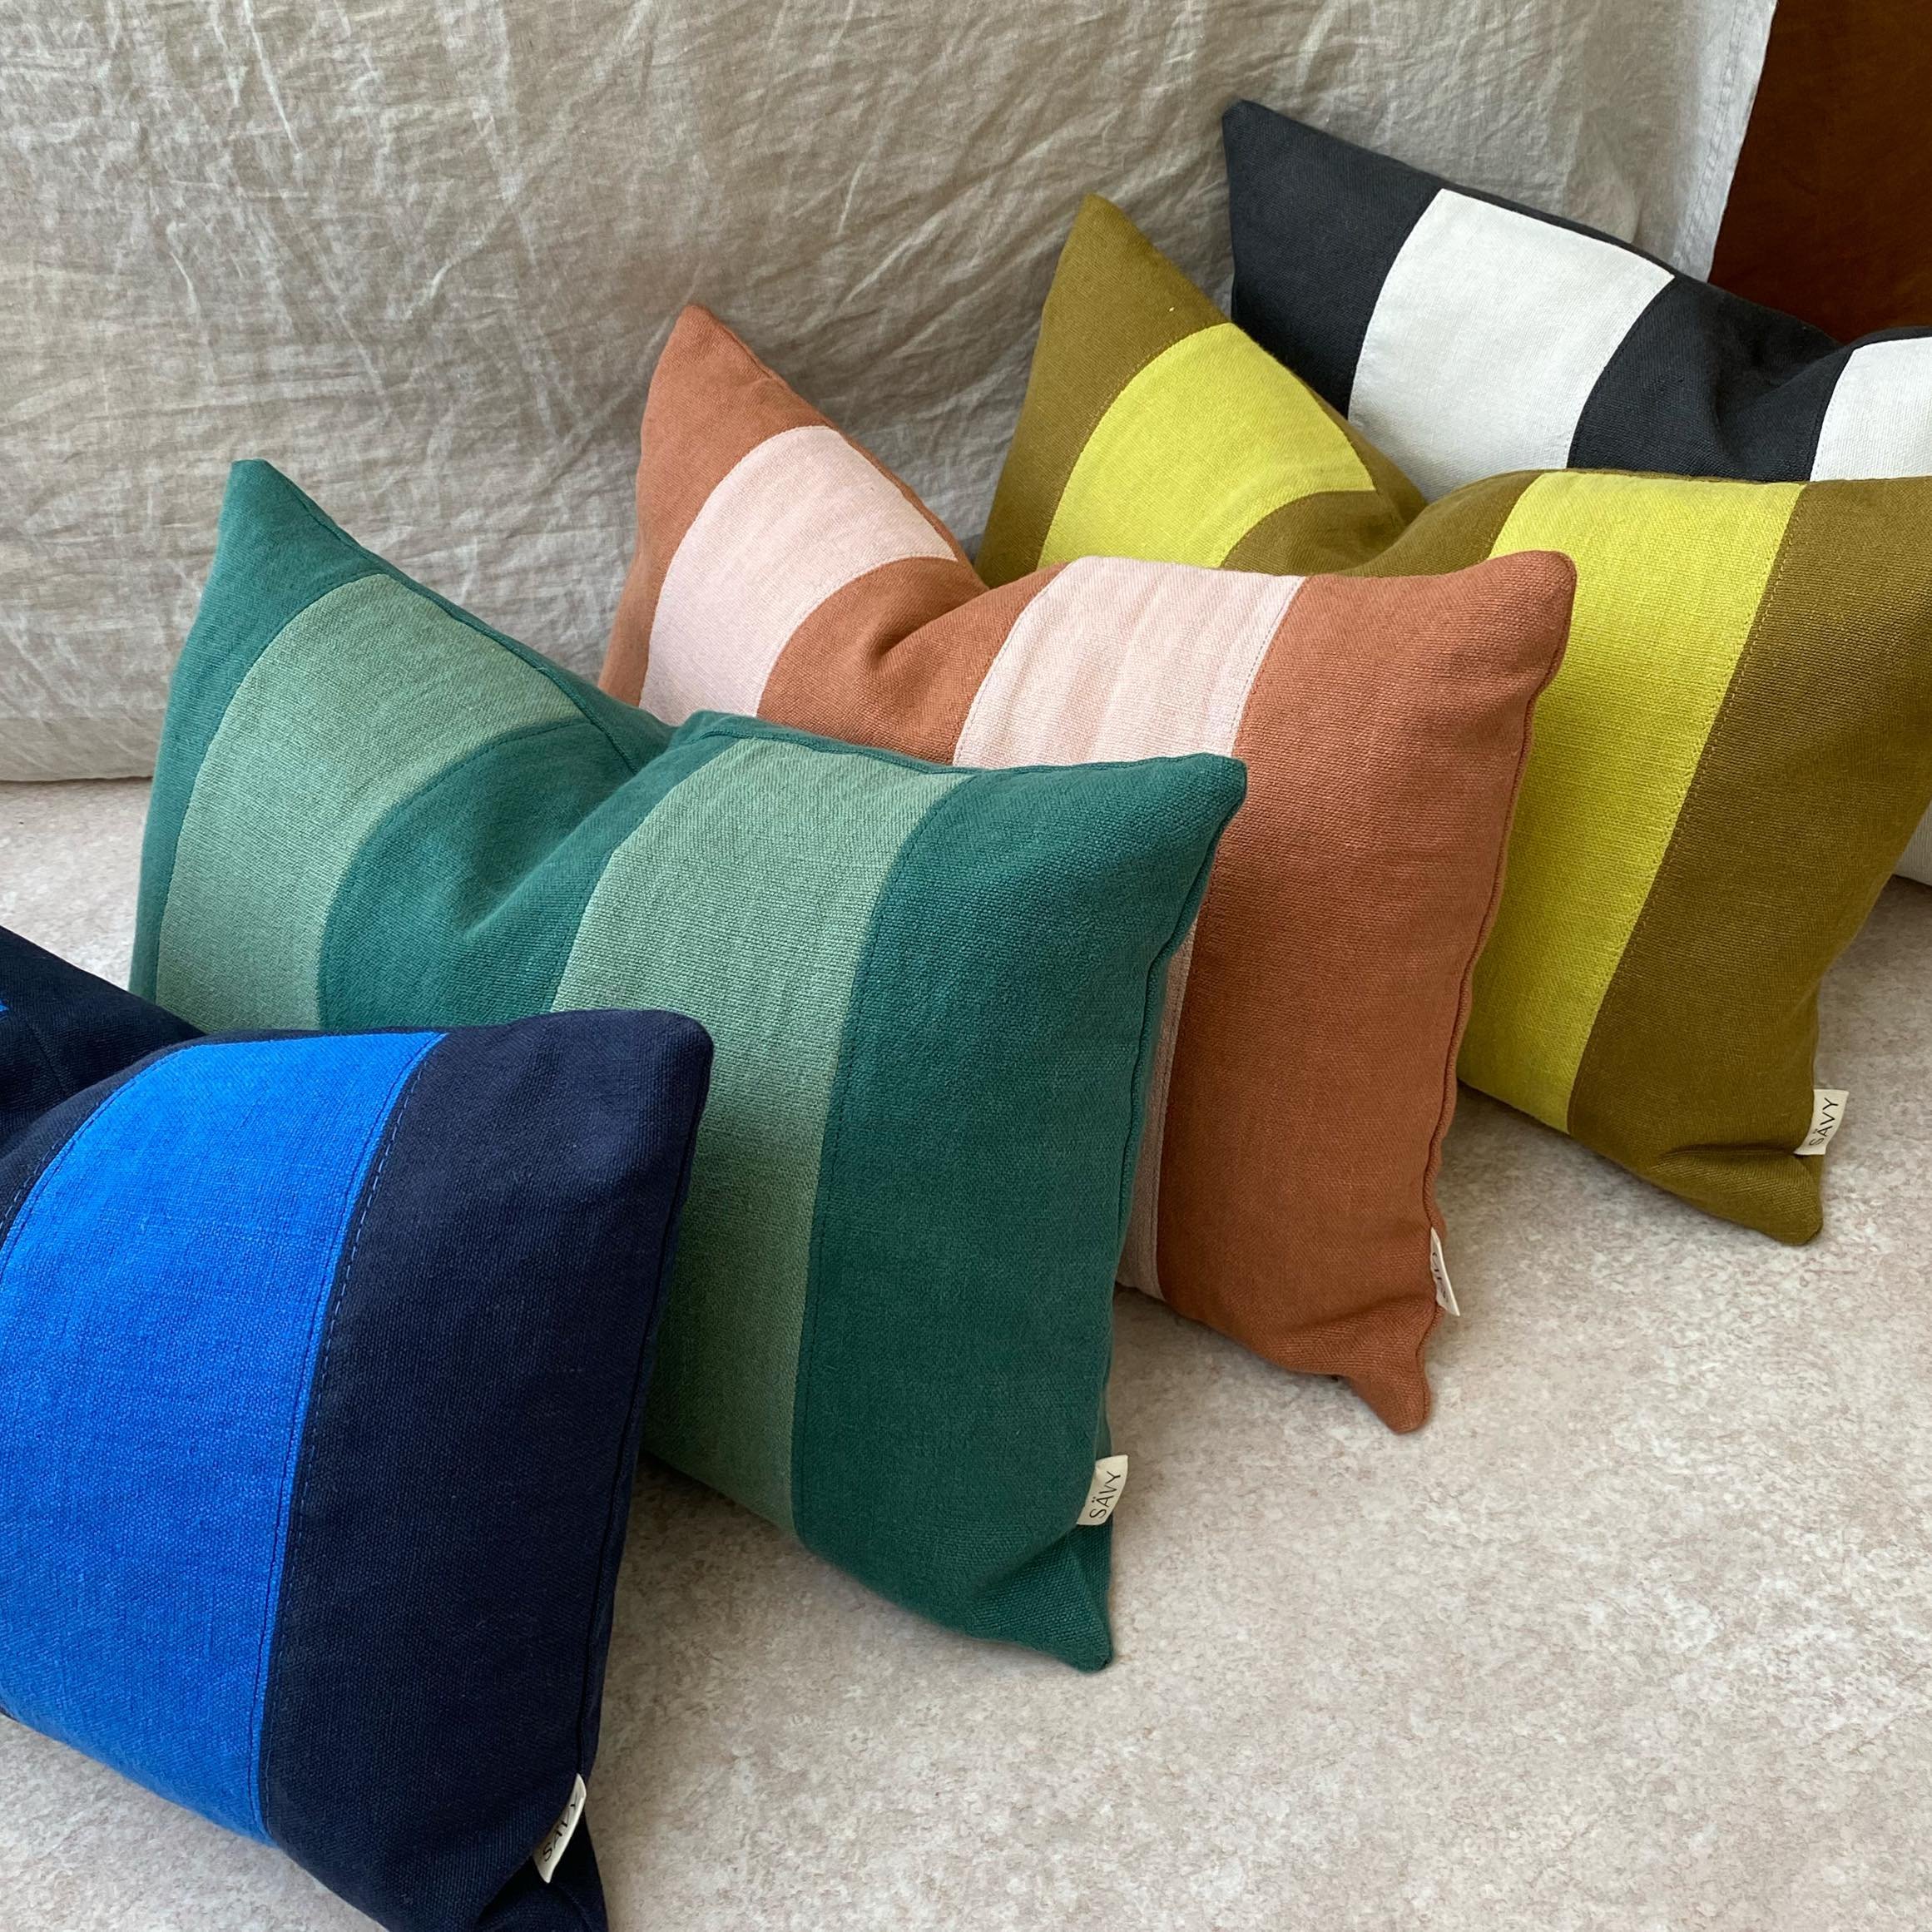 All our cushions are made from 100% linen. Panels are individually sewn together to create the classic stripe. 

Available on the website now.
.
.
.
#savyliving #upholsterymanchester #manchestermaker #textiles #linenhomewares #homewares #handmademanc